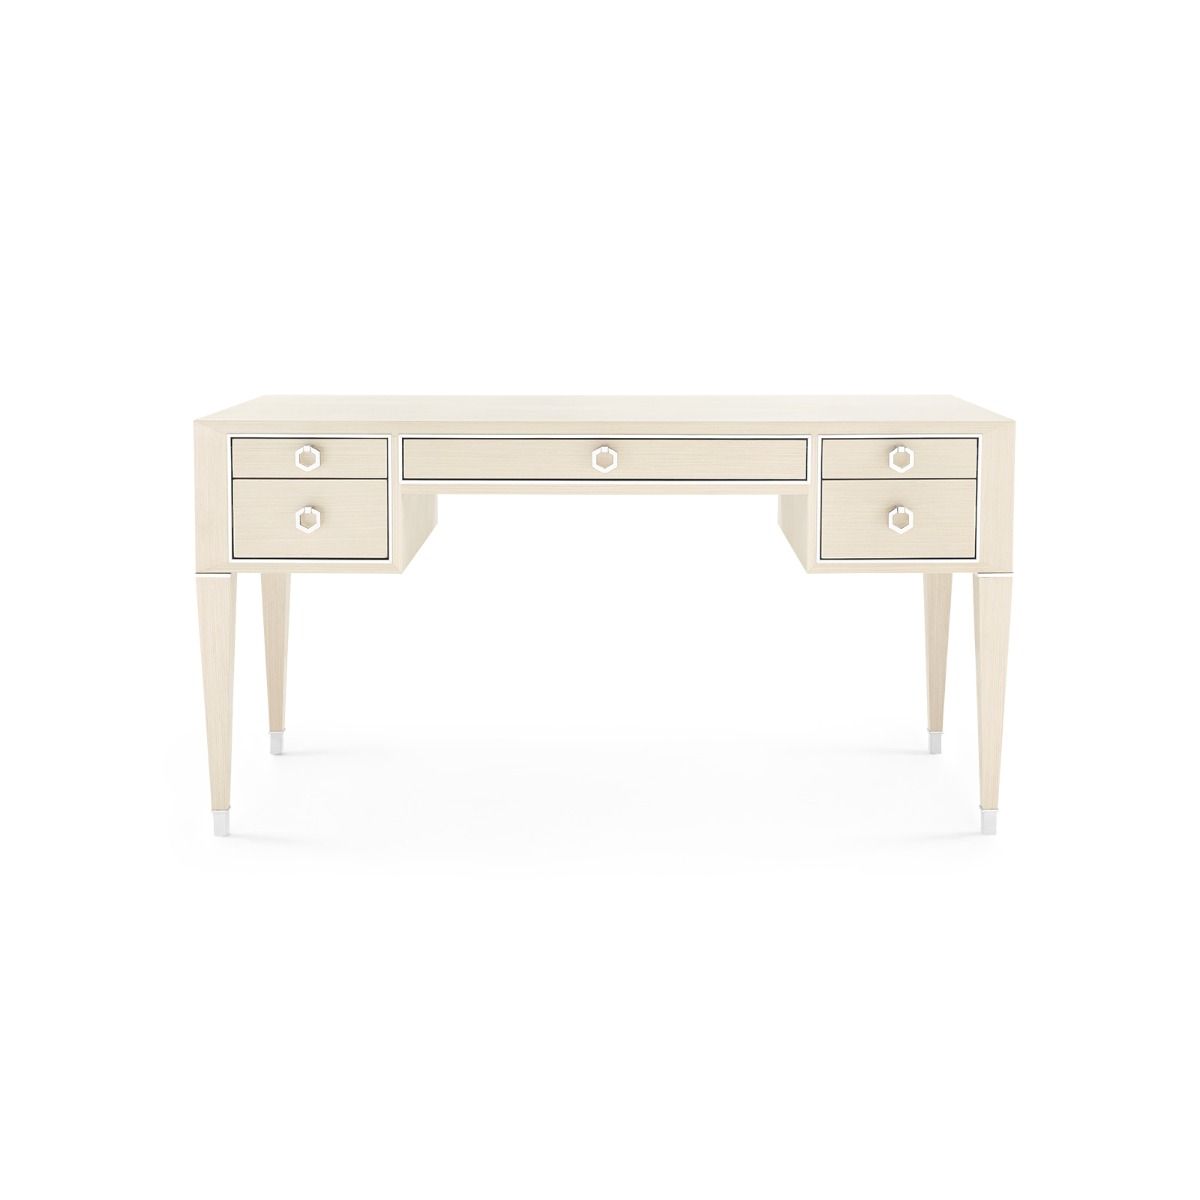 Lanna Blanched Oak and Nickel Desk